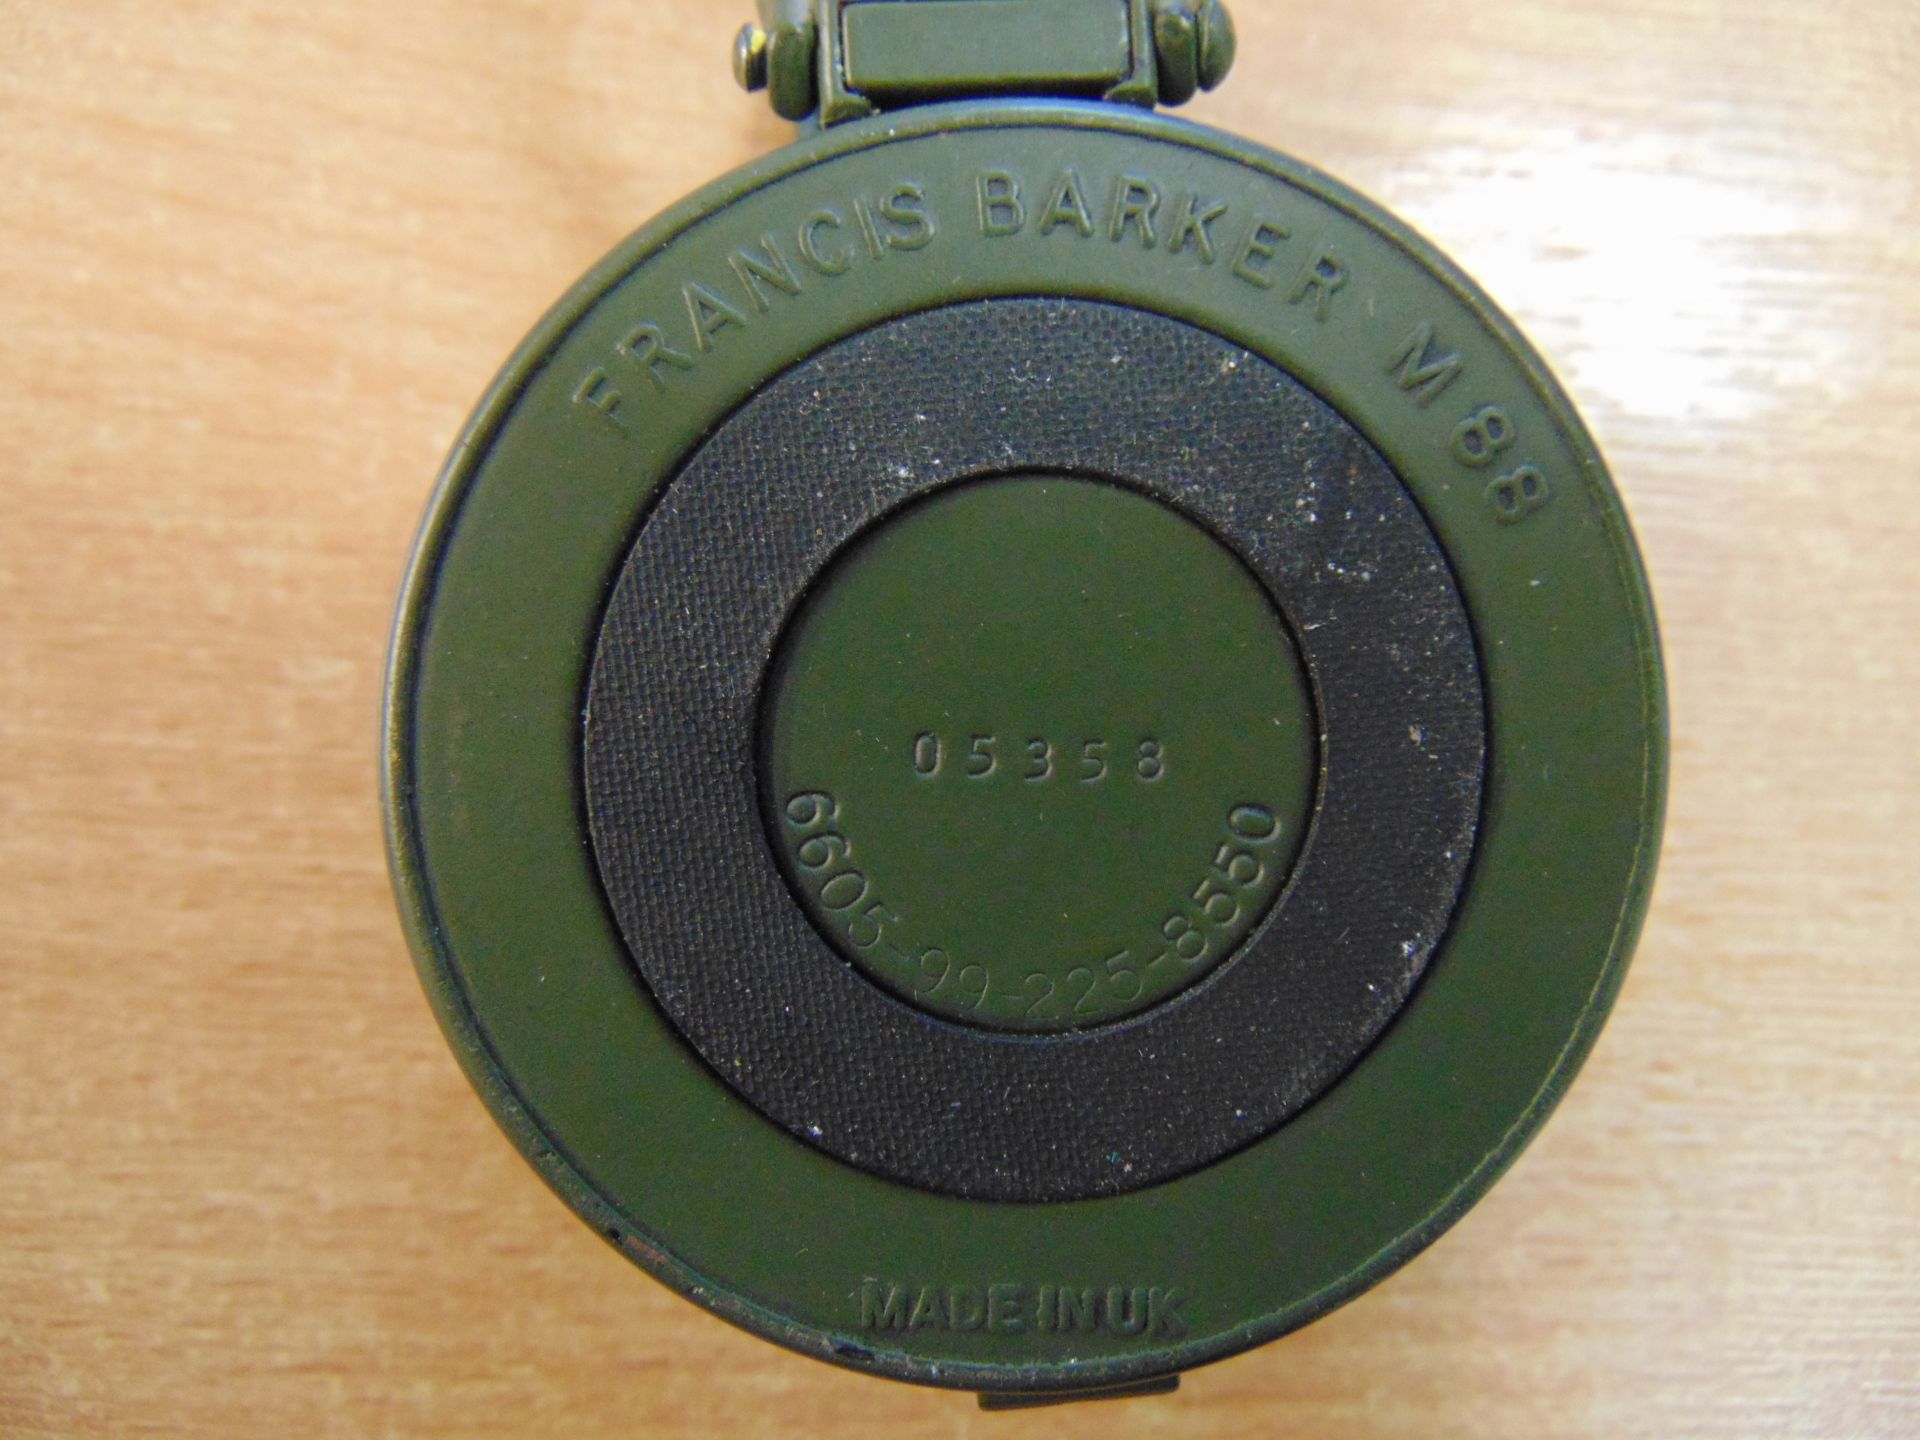 UNISSUED FRANCIS BAKER M88 COMPASS - Image 3 of 5